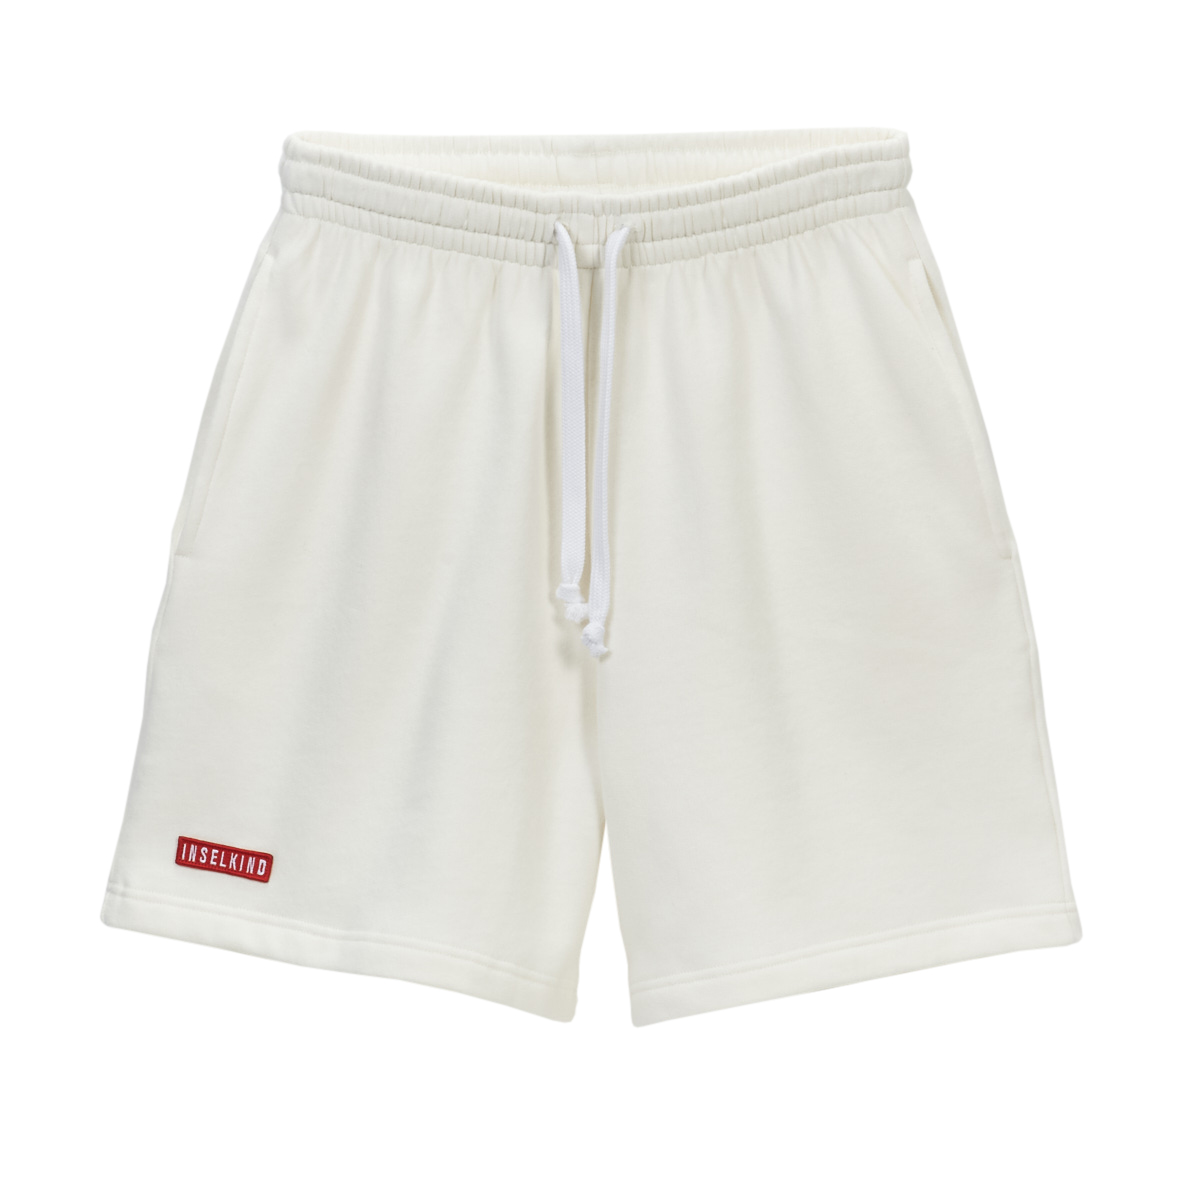 Inselkind Shorts / off white / red